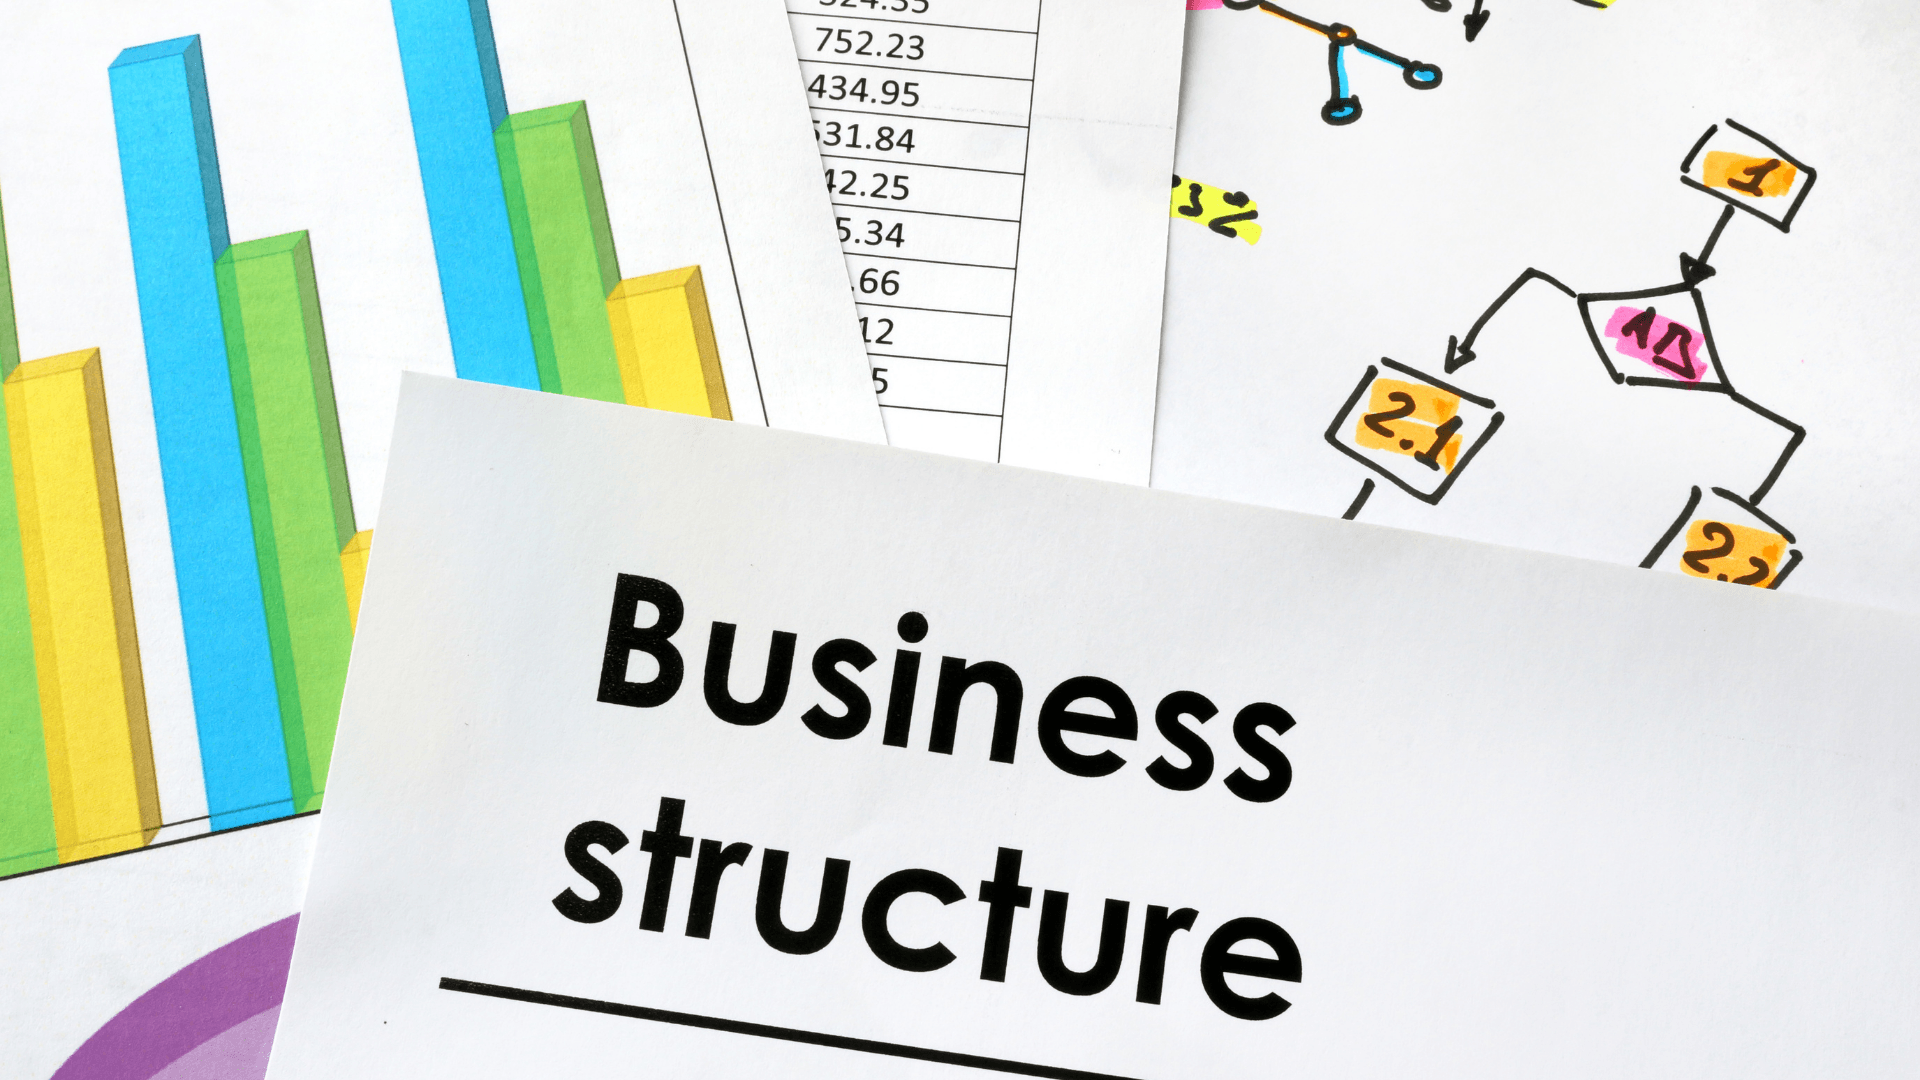 Business structure document on paper stack